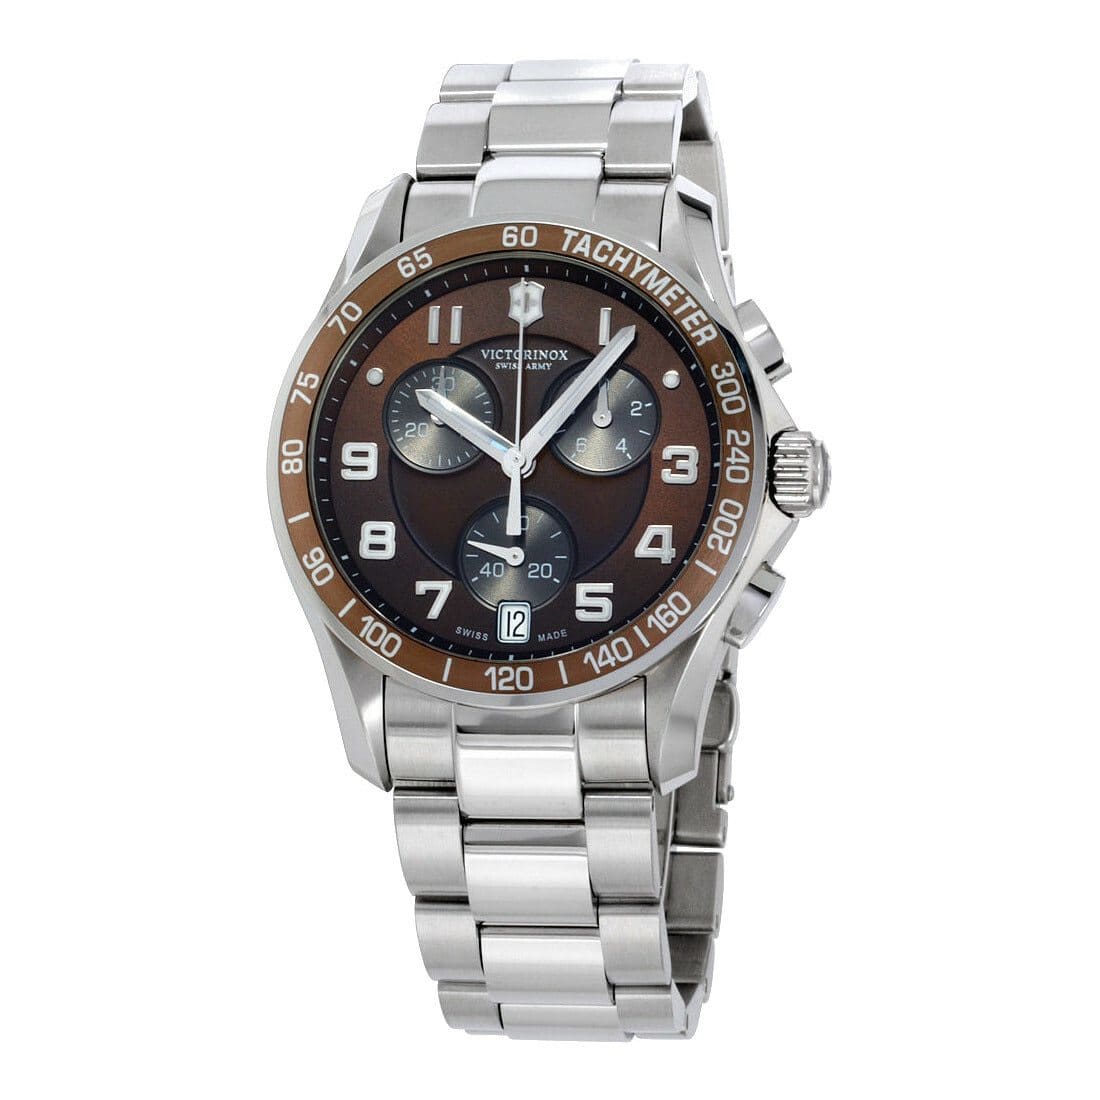 Victorinox Swiss Army 249036 Stainless Steel Brown Dial Men's Chronograph Watch 046928545537